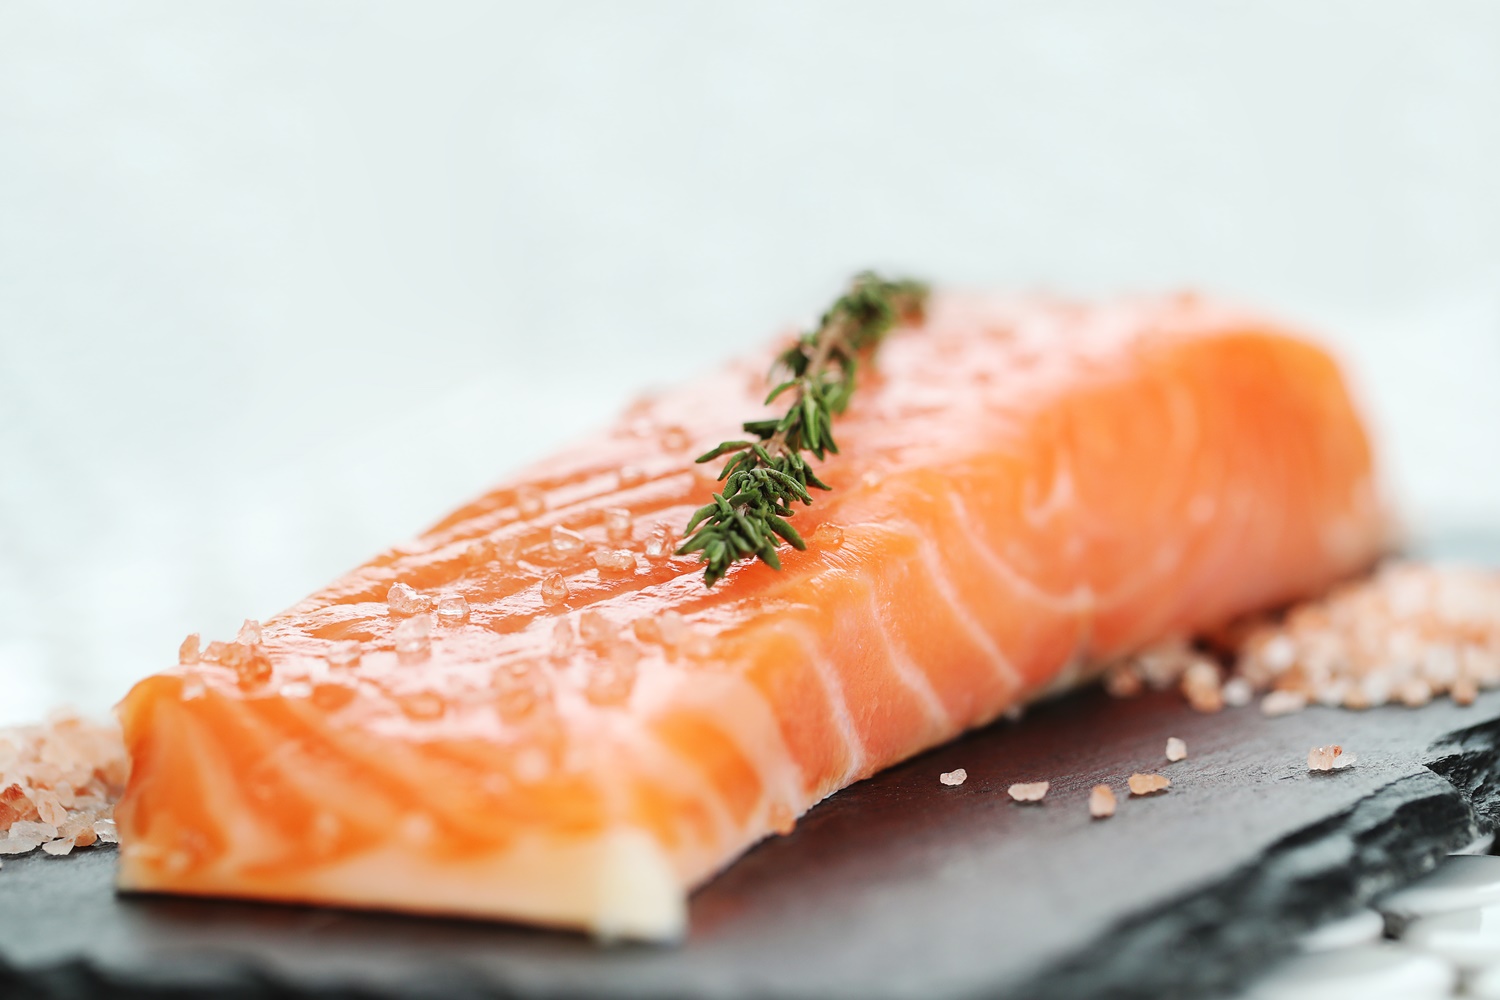 Why you should eat fish: Benefits for health and well-being